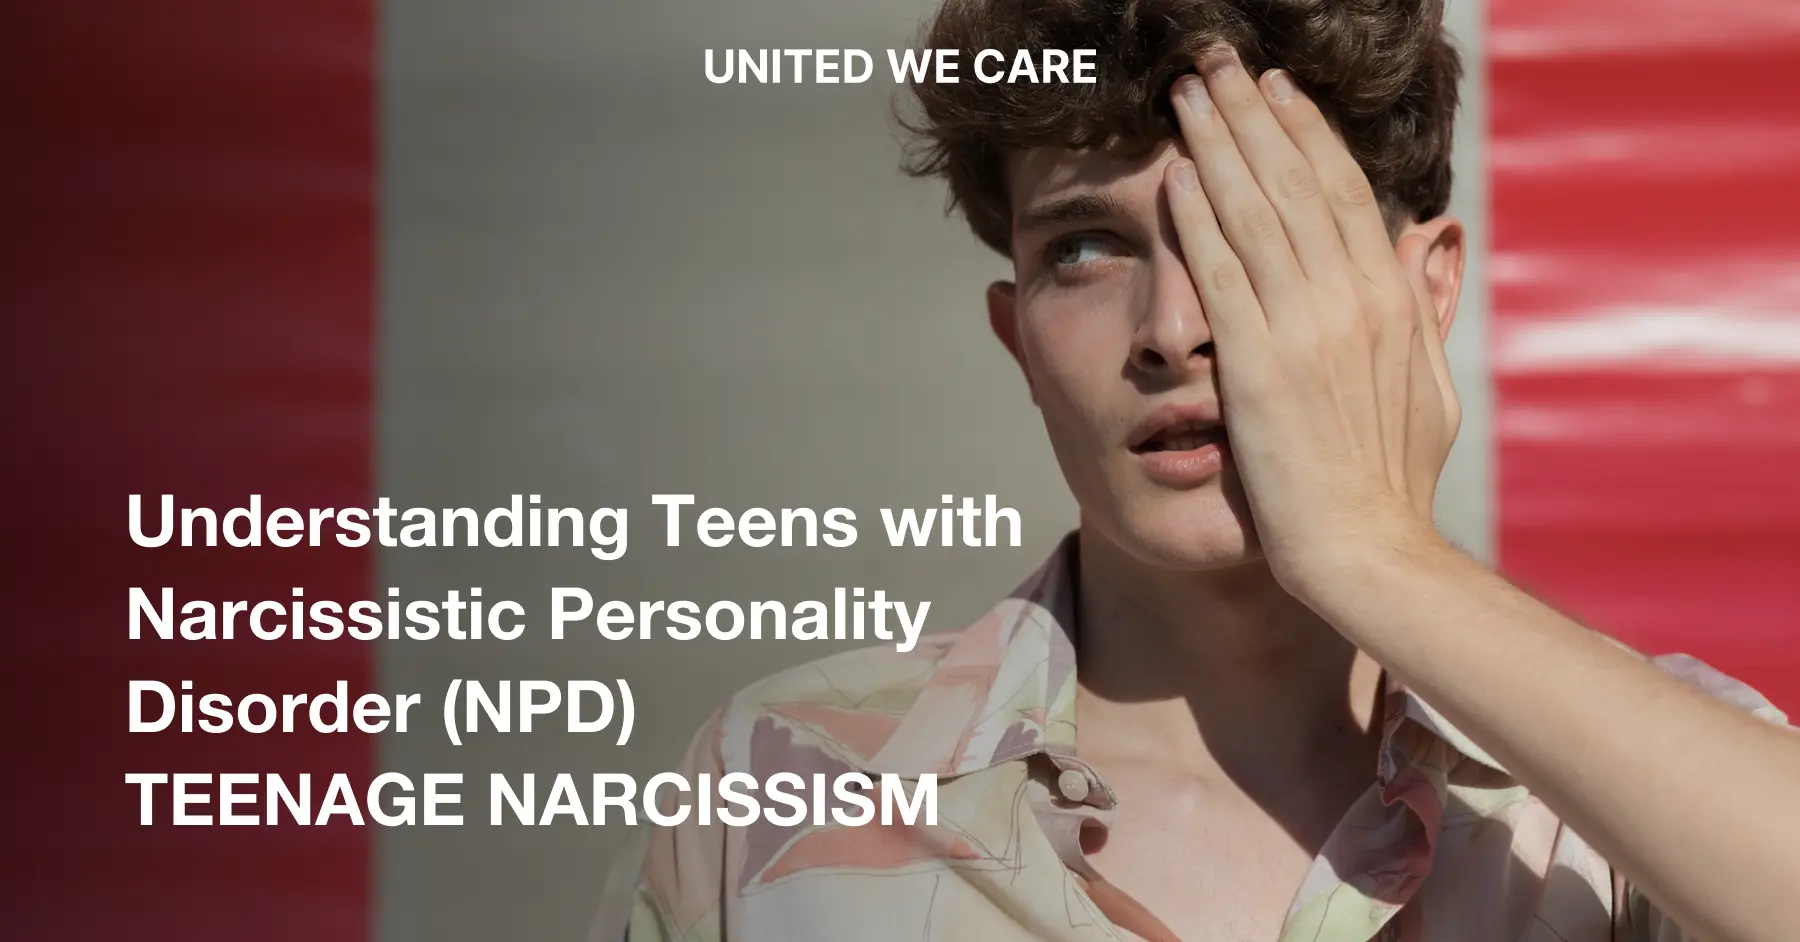 Teen with Narcissistic Personality Disorder: 6 ways to understand